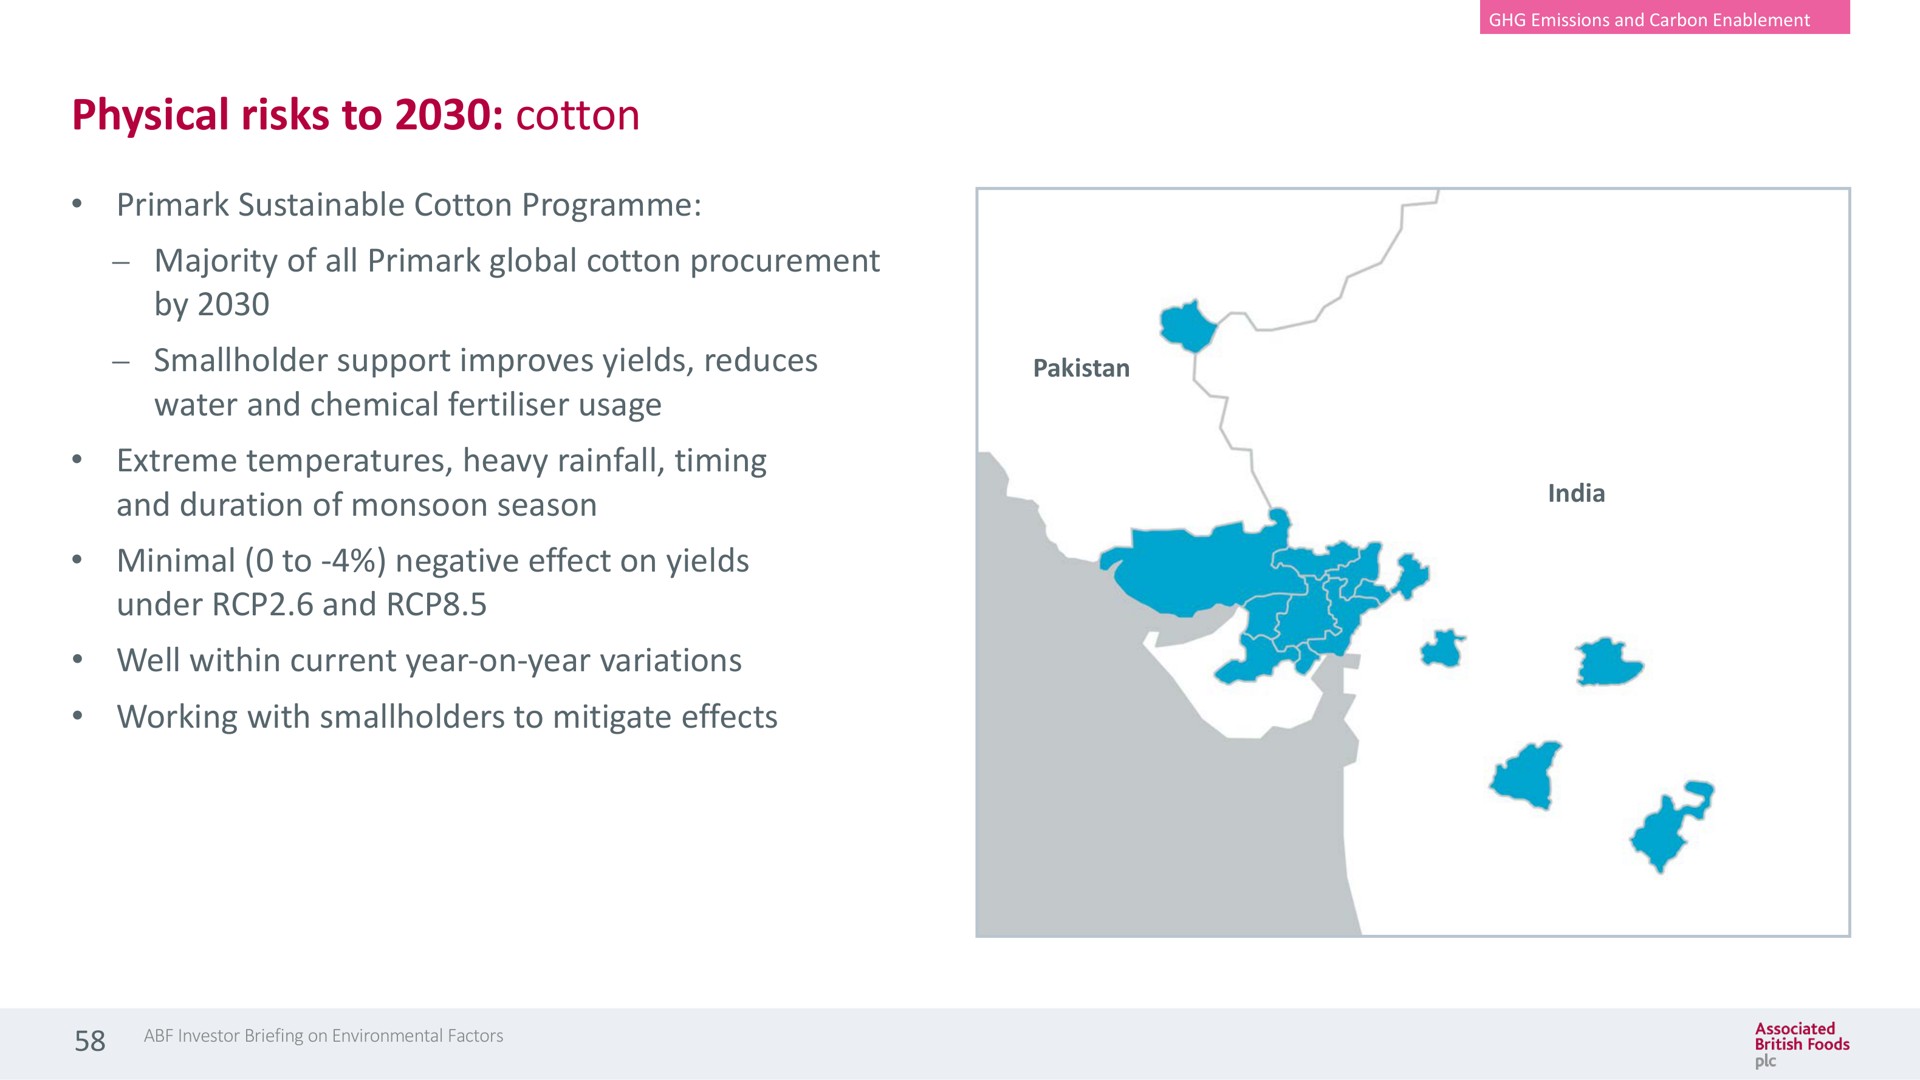 physical risks to cotton sustainable cotton majority of all global cotton procurement by smallholder support improves yields reduces water and chemical usage extreme temperatures heavy rainfall timing and duration of monsoon season minimal to negative effect on yields under and well within current year on year variations working with smallholders to mitigate effects | Associated British Foods